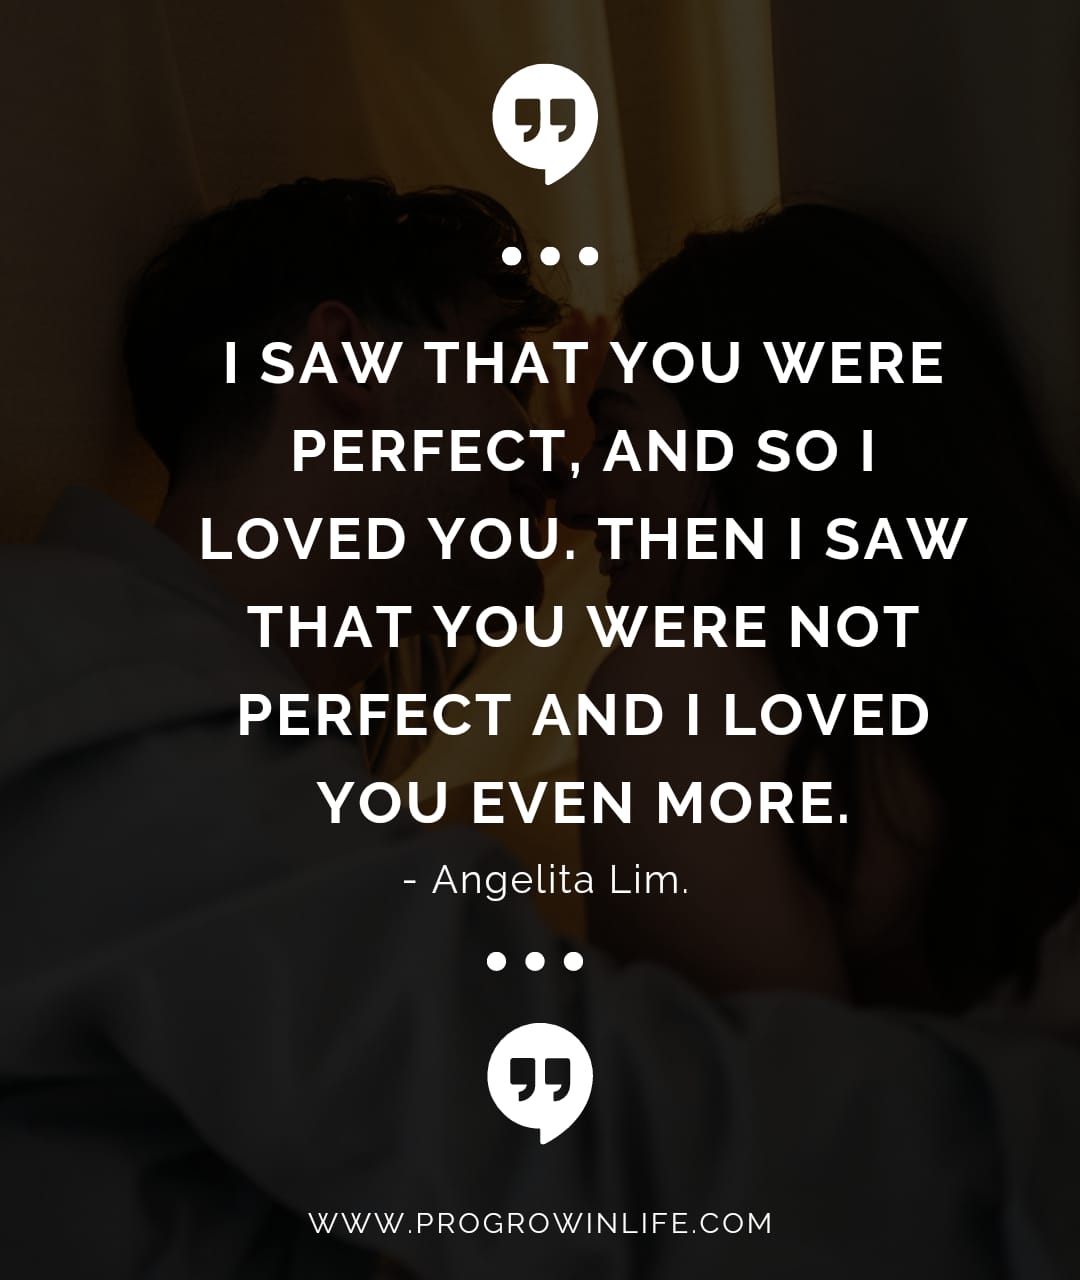 cute love quotes for him